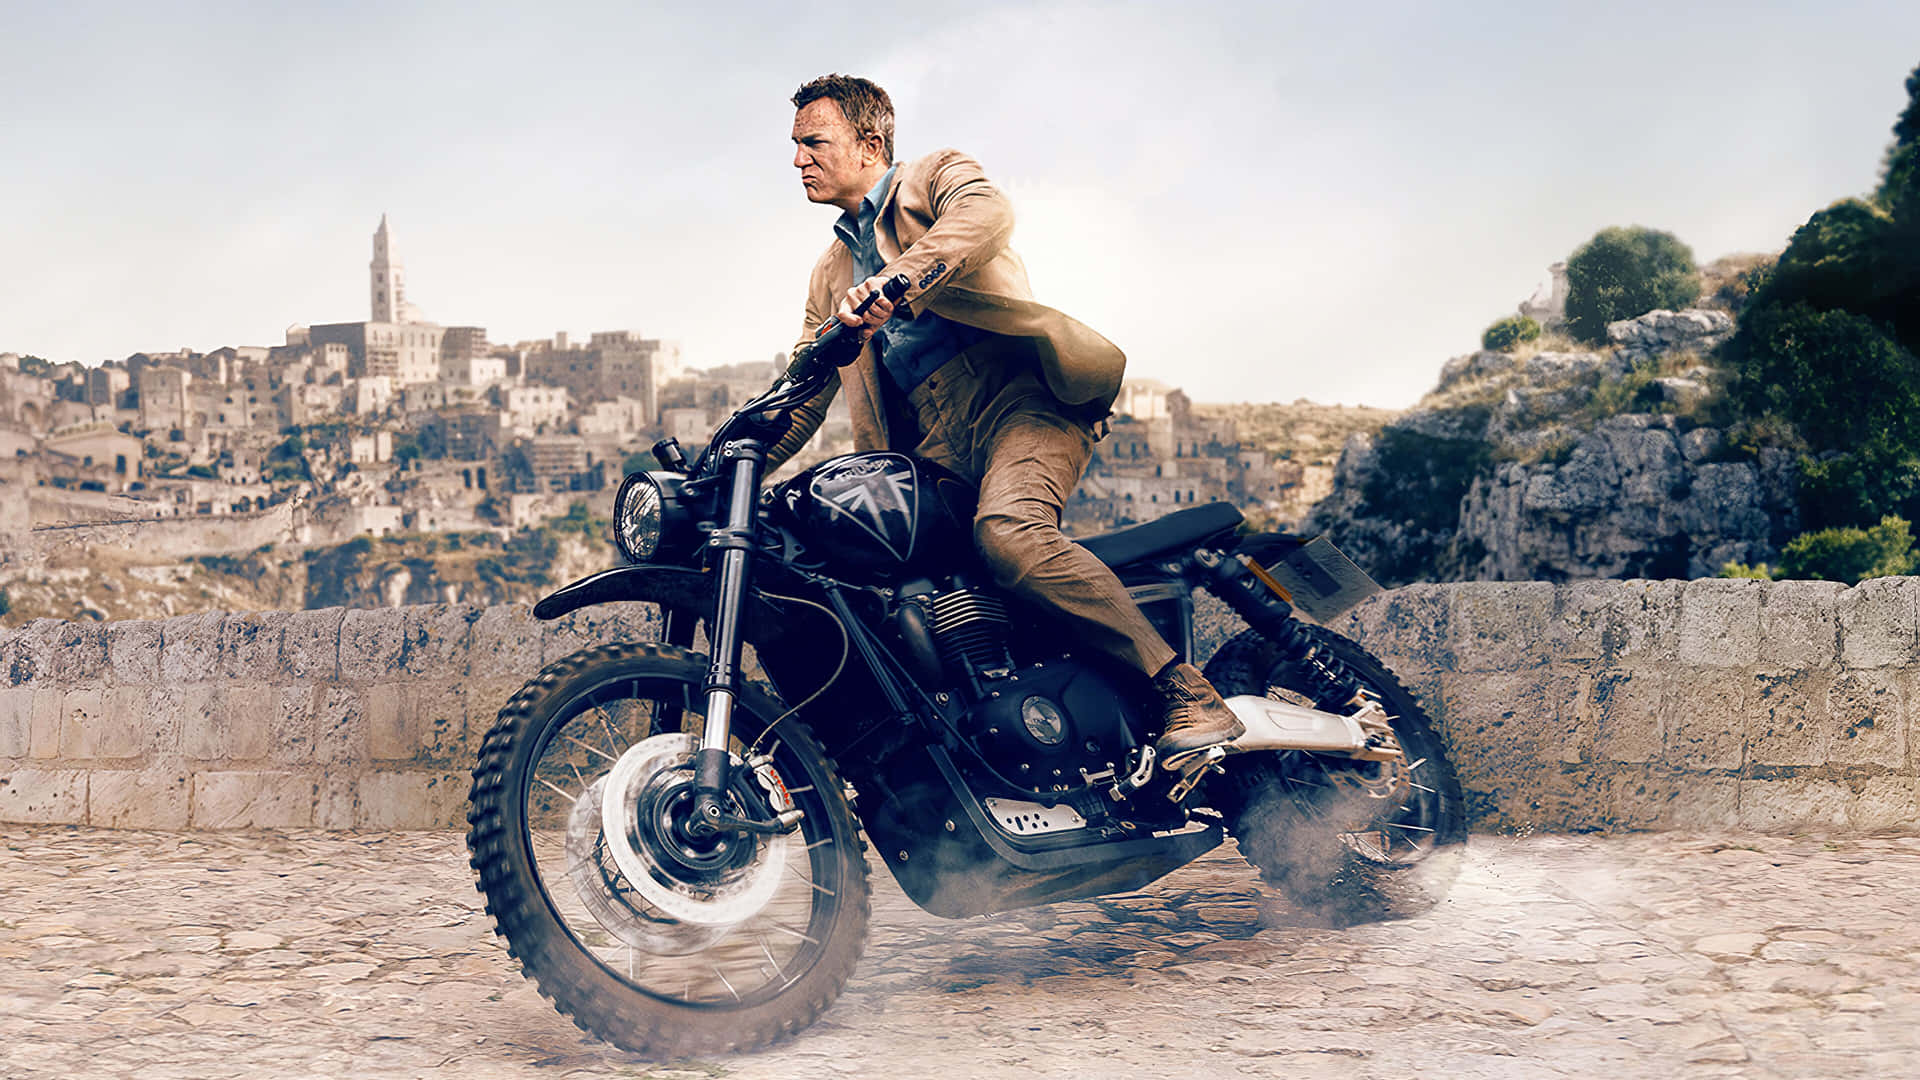 Action Packed Motorcycle Chase Scene Wallpaper